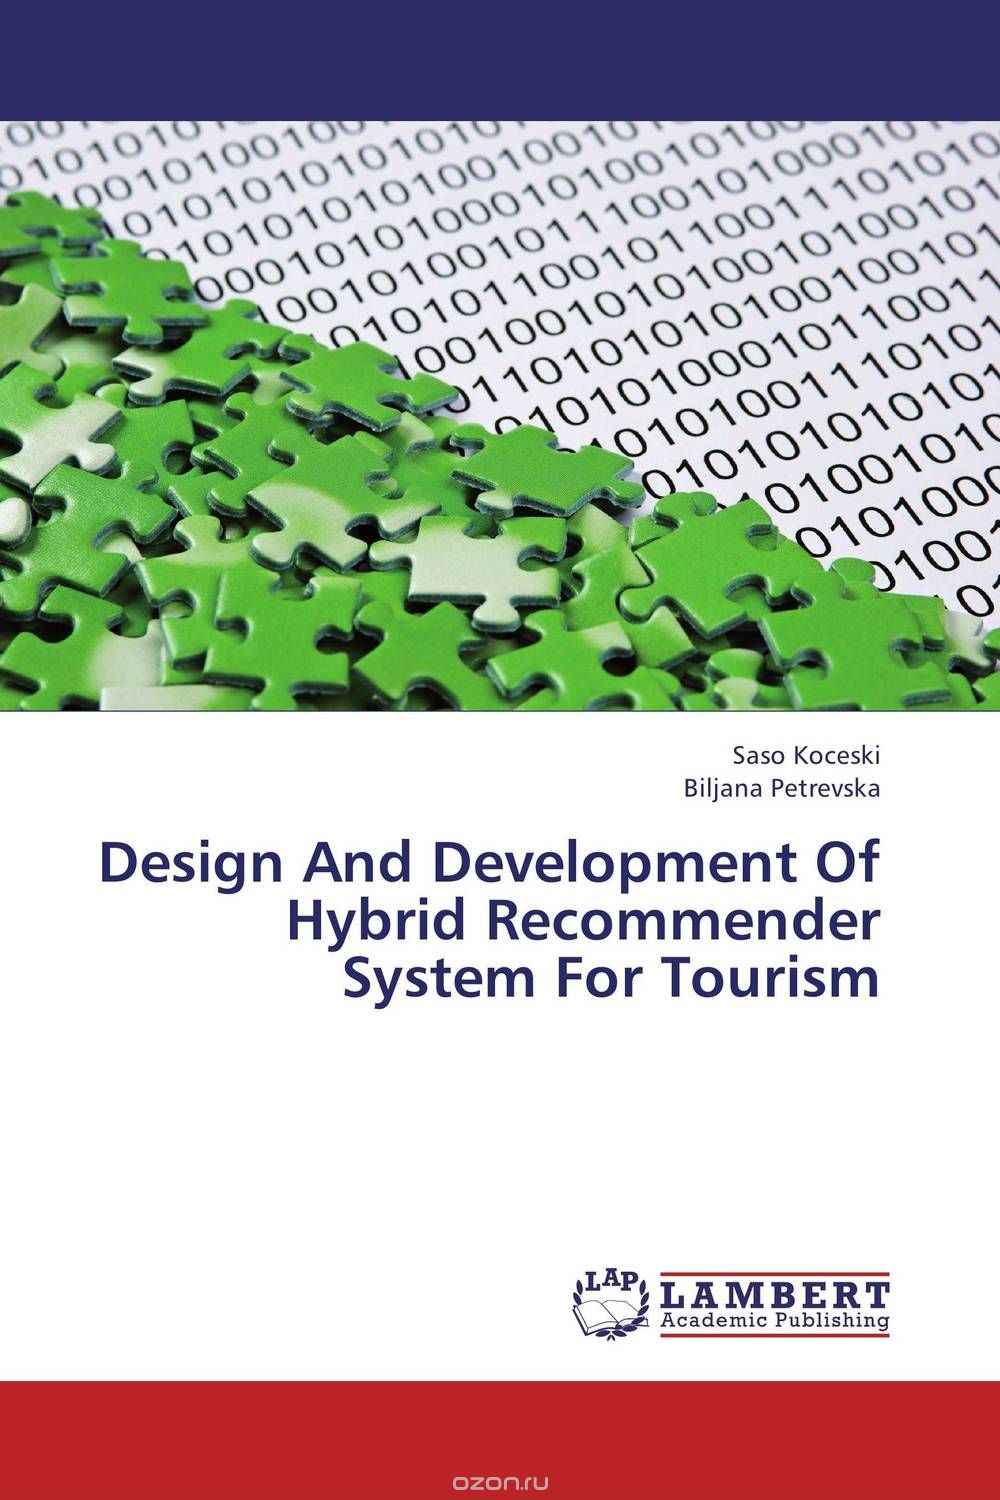 Design And Development Of Hybrid Recommender System For Tourism